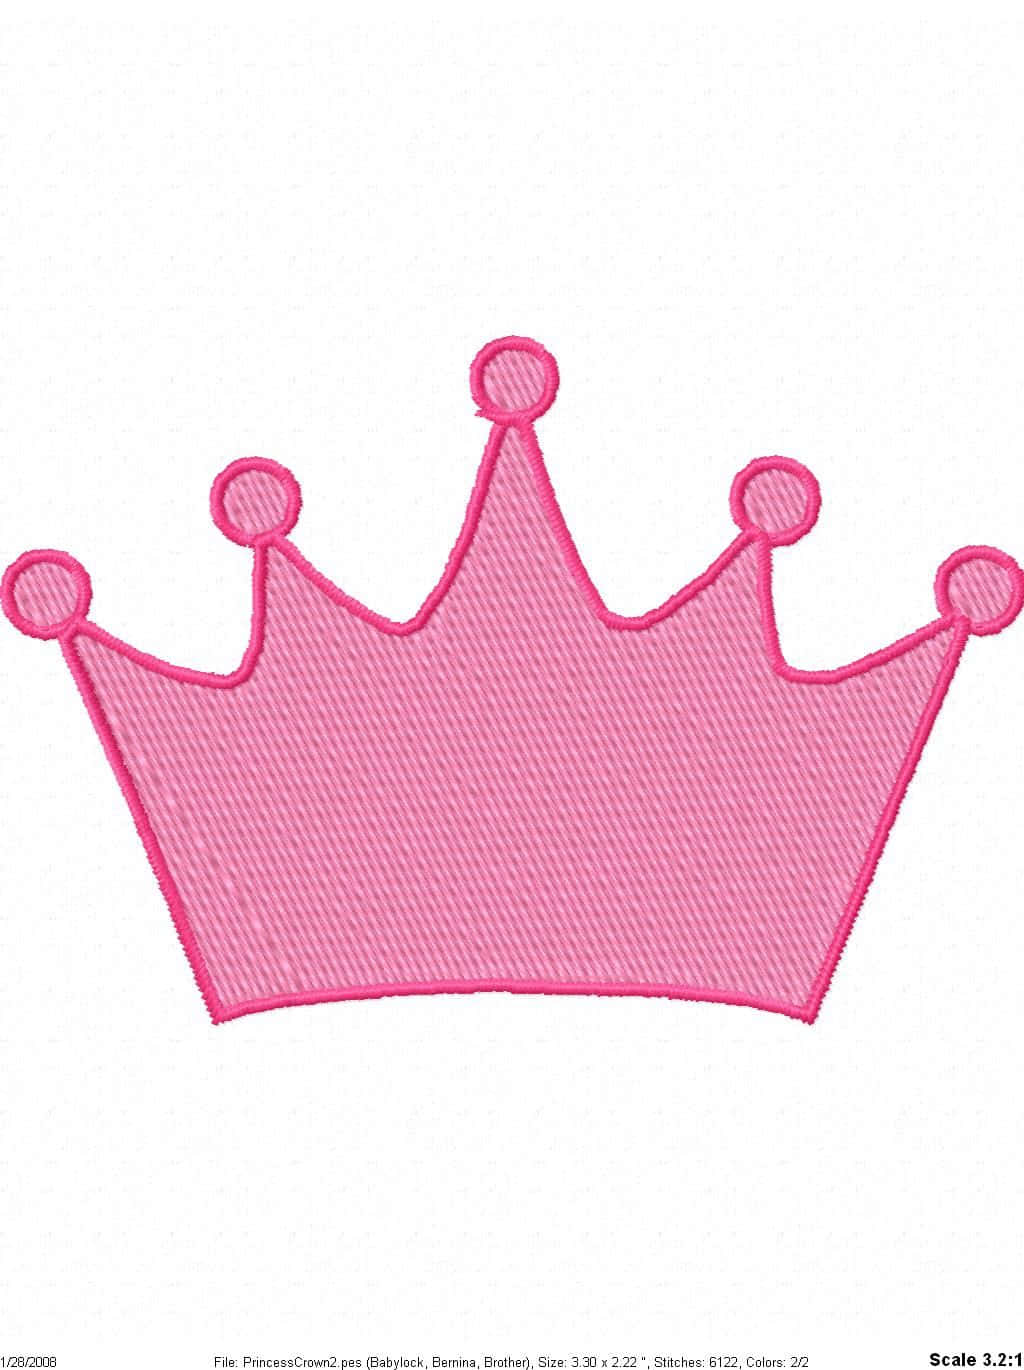 A Pink Crown Embroidery Design Wallpaper